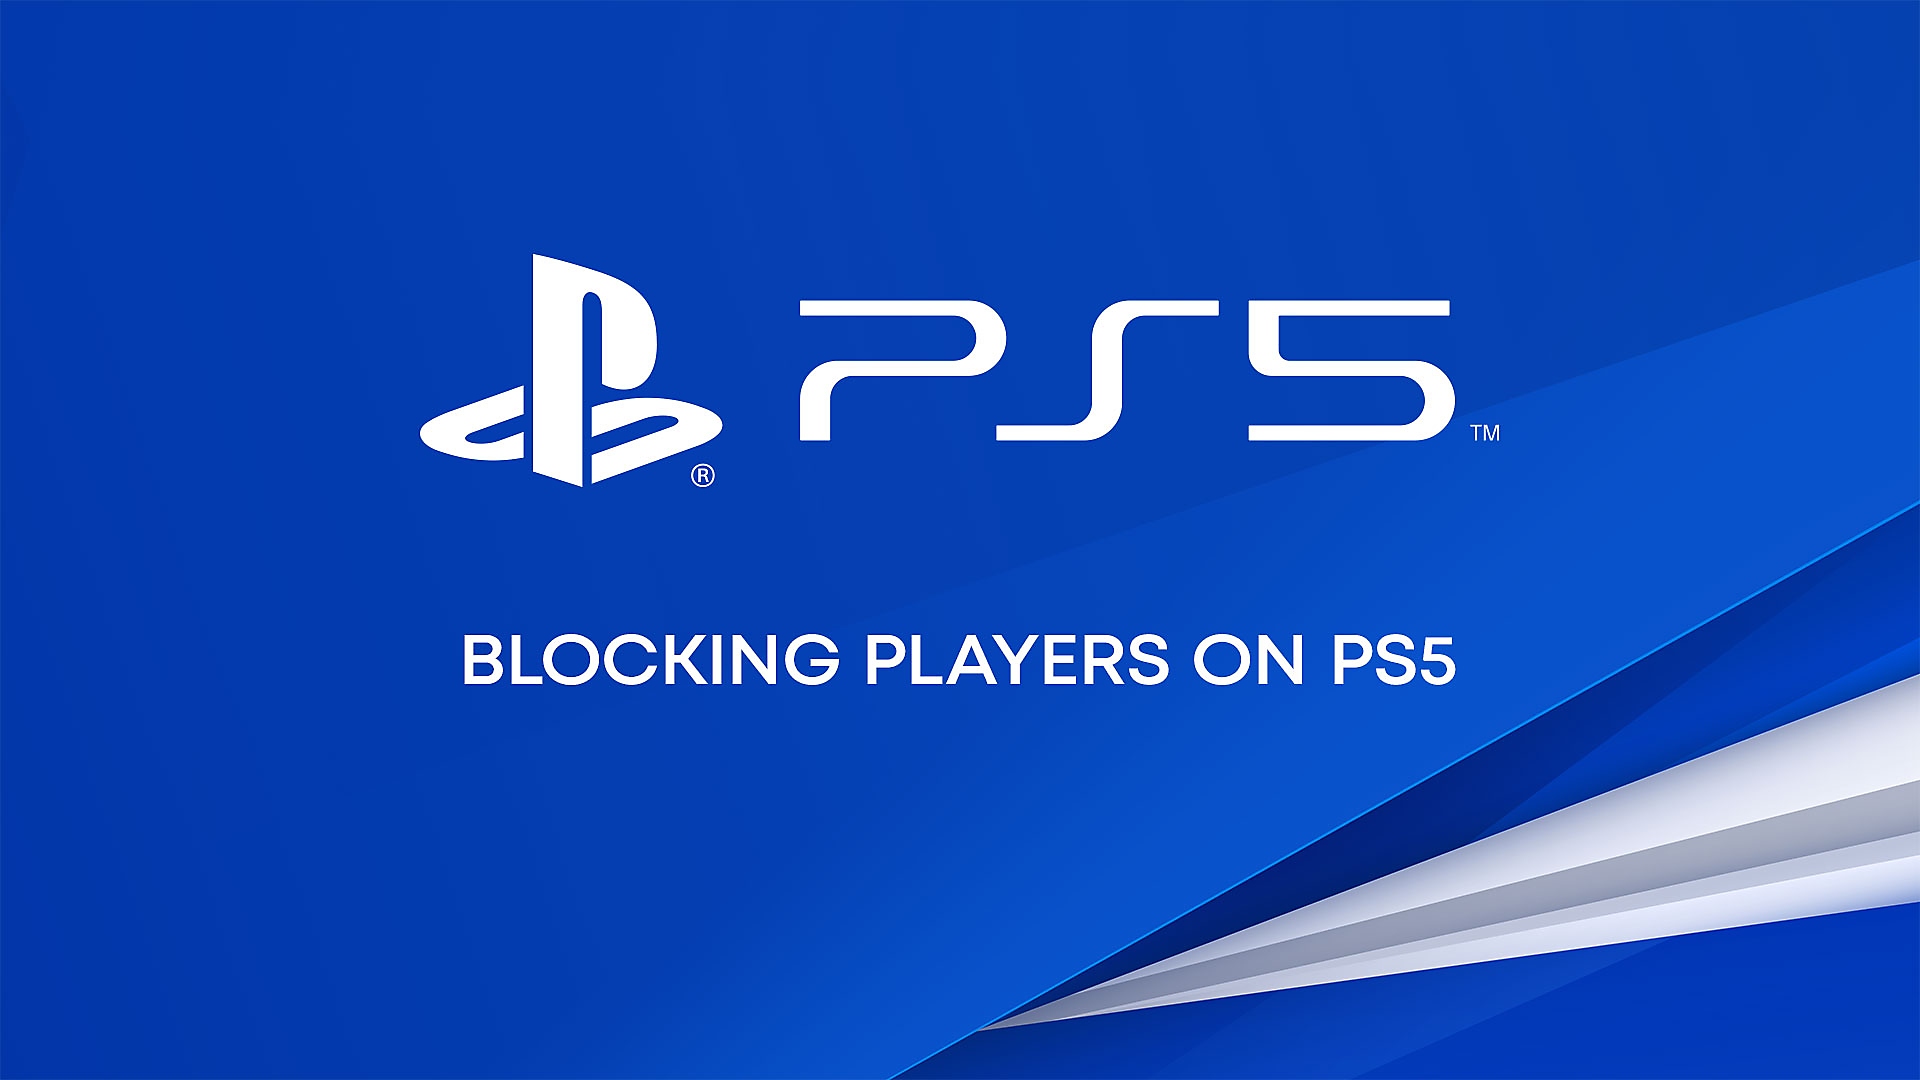 Youtube video regarding blocking players on PS5 console